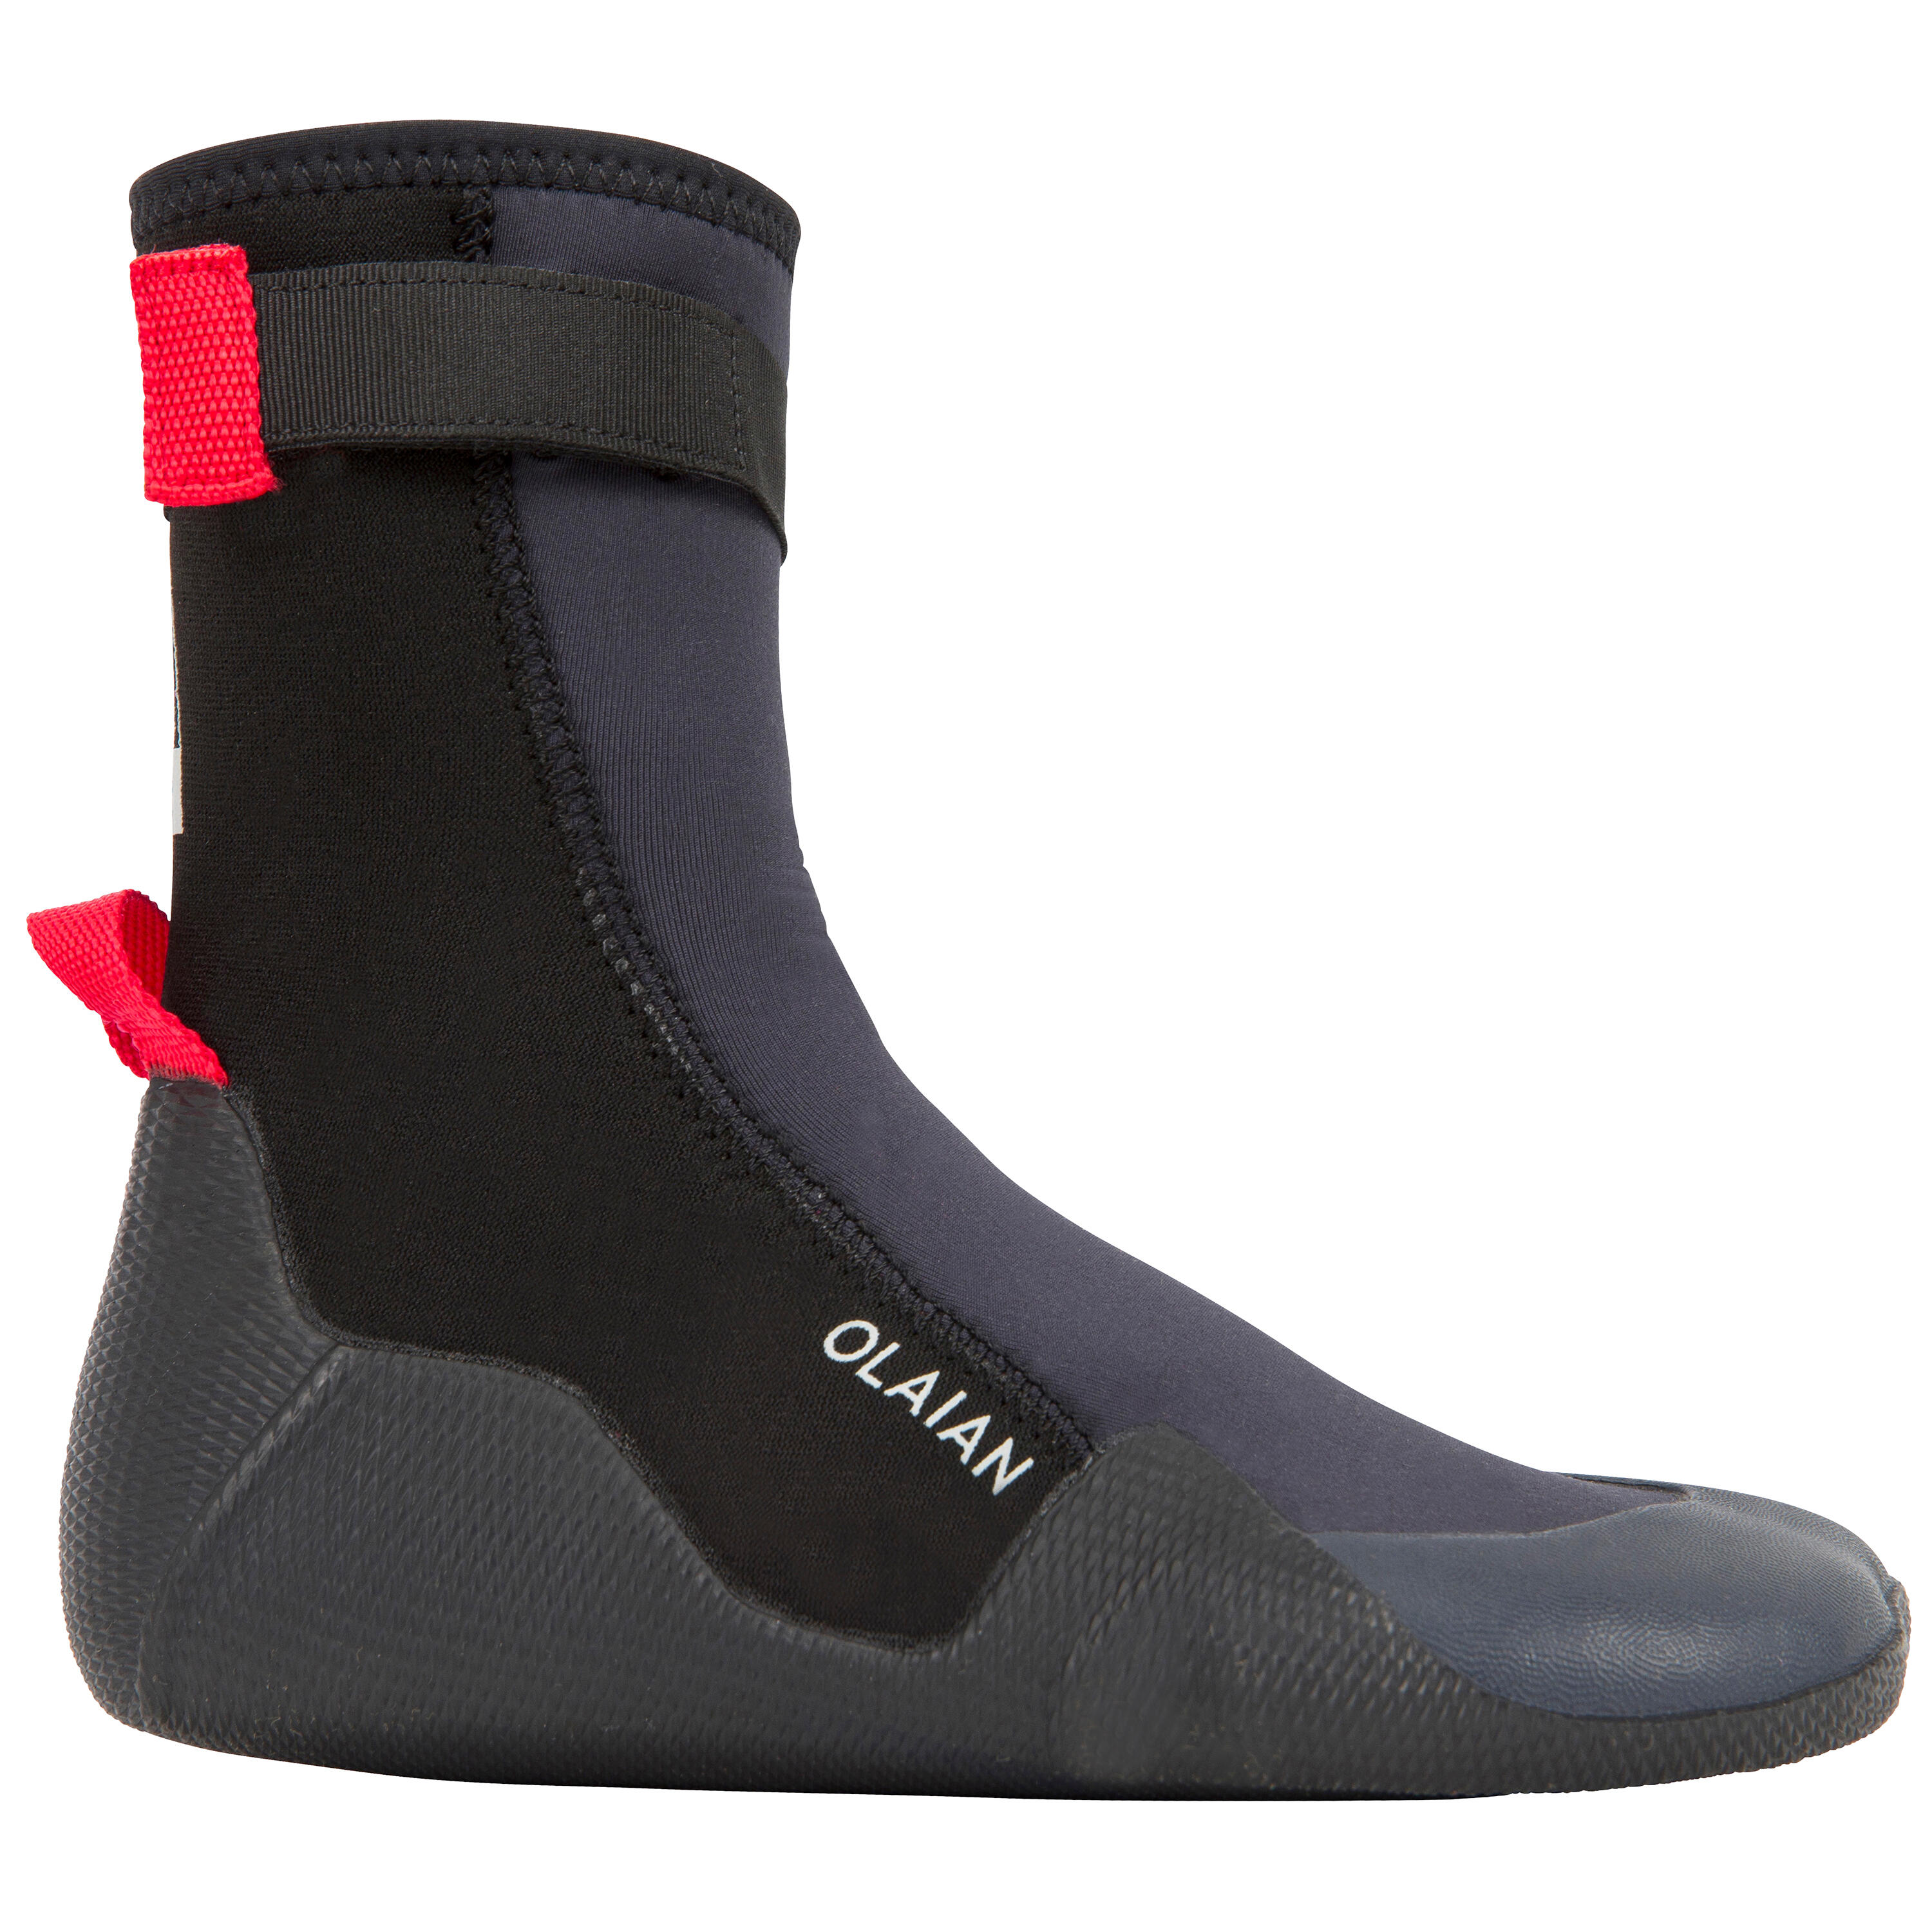 Kids' shoes 500 3 mm - black/red 3/8